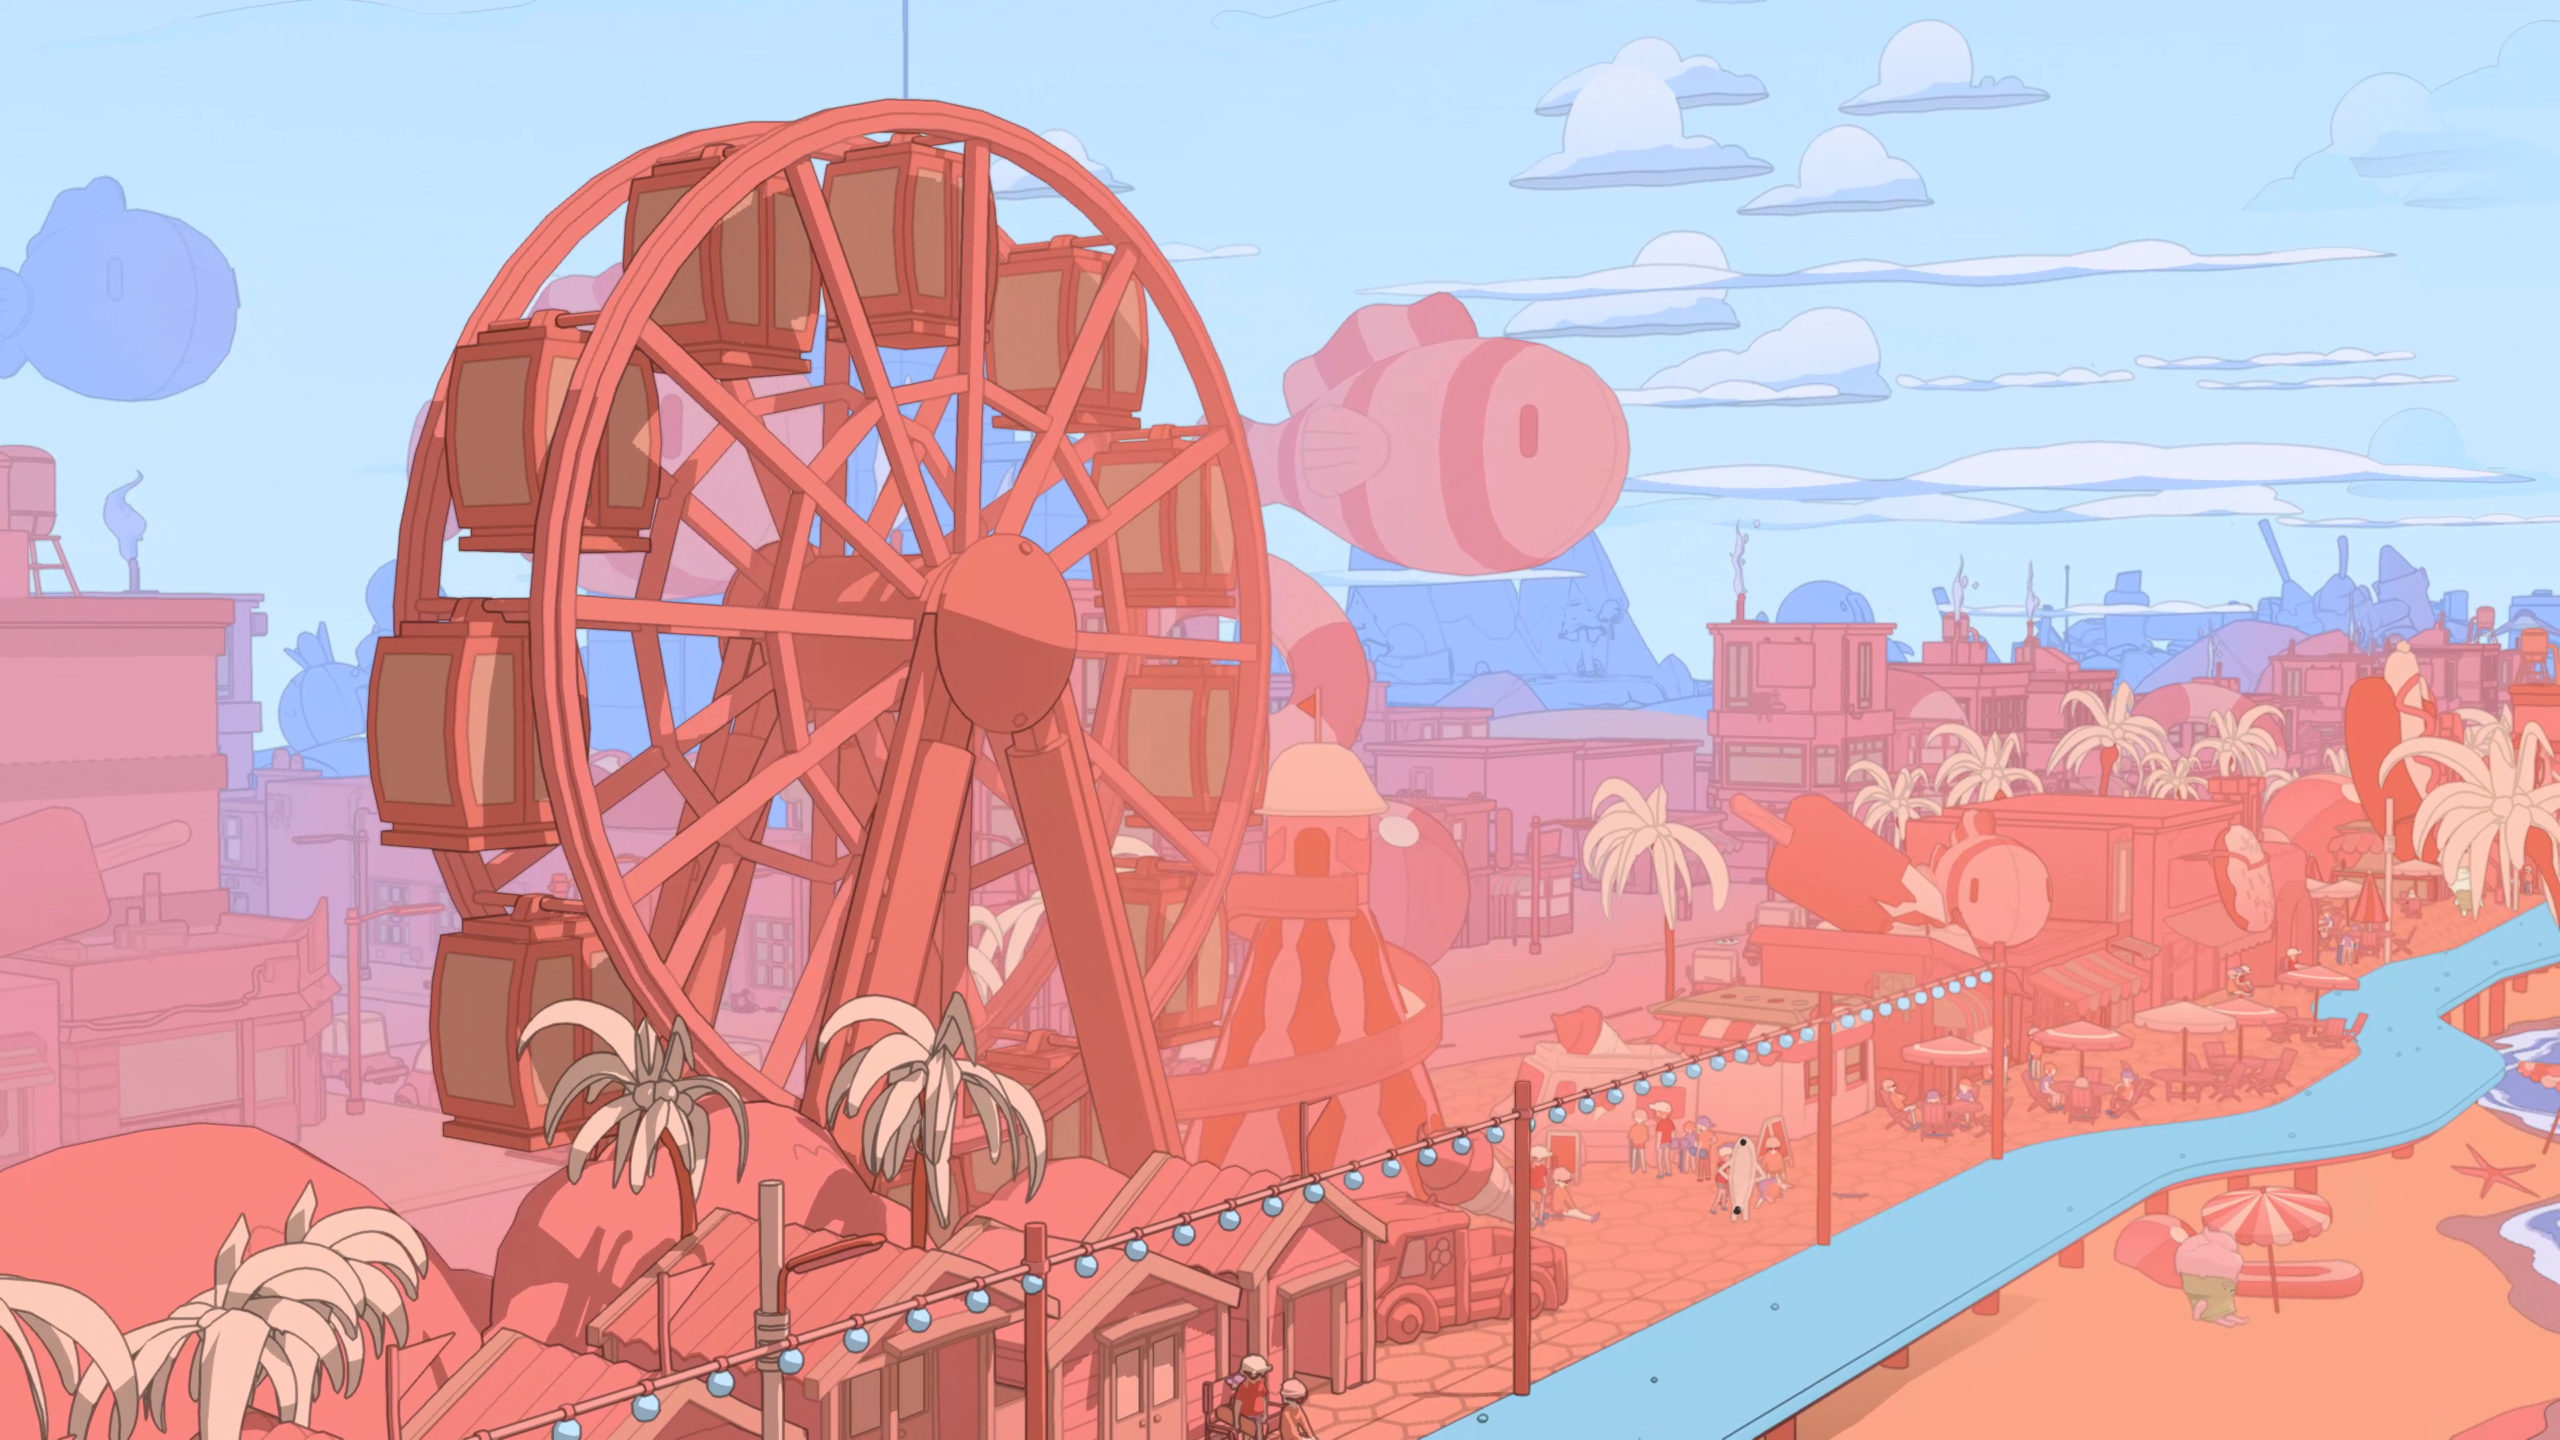 A screenshot of the landscape of the game's first area, a pinch beach area with a big ferris wheel